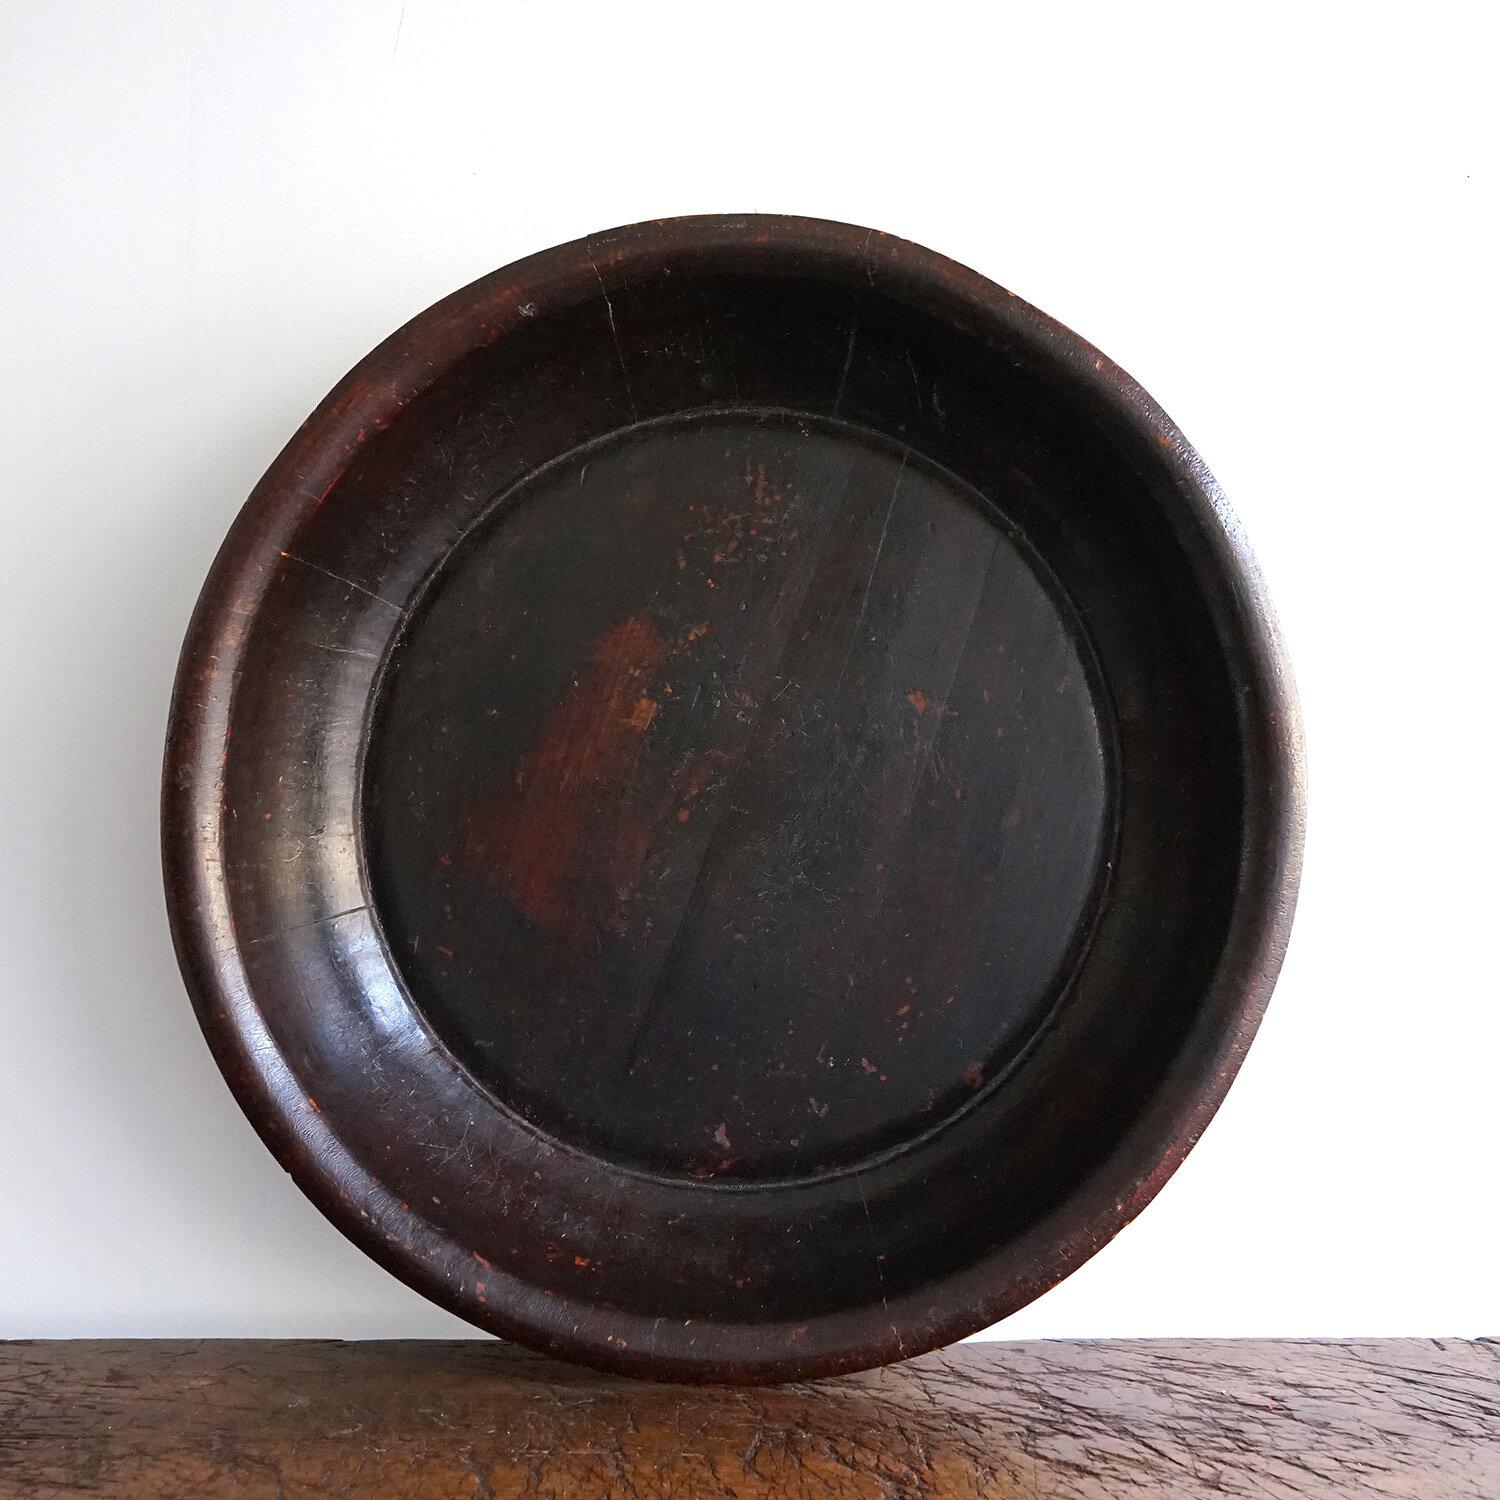 Very Large Antique Chinese Wooden Bowl, 19th Century

We have had a few suggestions for its original use from grain and rice to dough and laundry. Perhaps it was always destined to be multi-use.

It works well in the middle of a large rustic dining